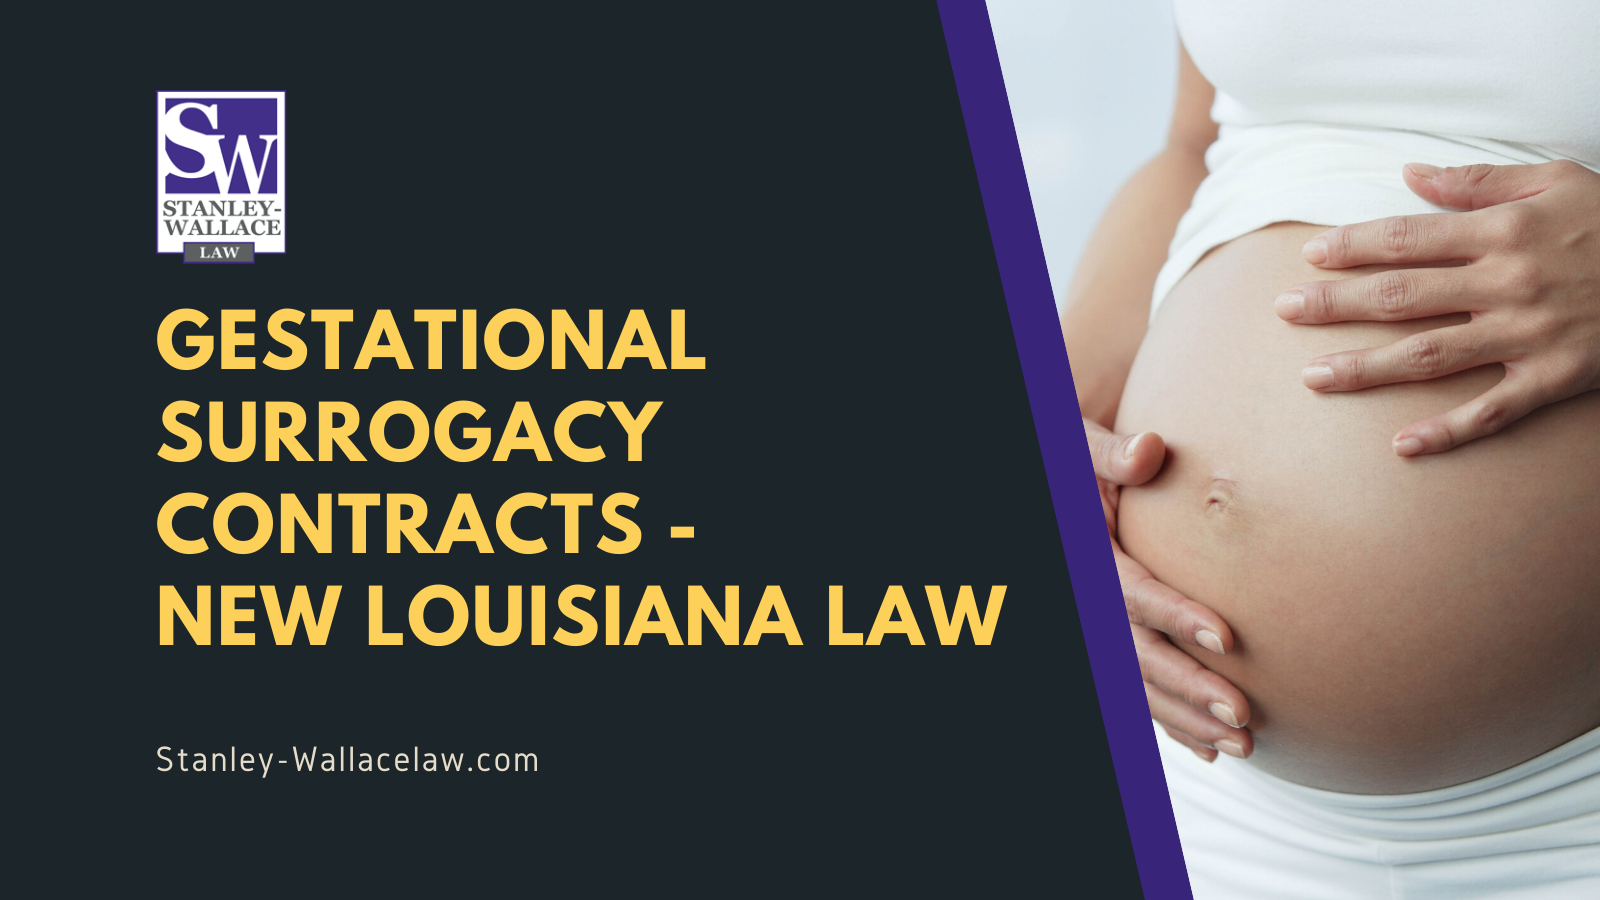 Gestational Surrogacy Contracts New Louisiana Law - Stanley-Wallace Law - slidell louisiana